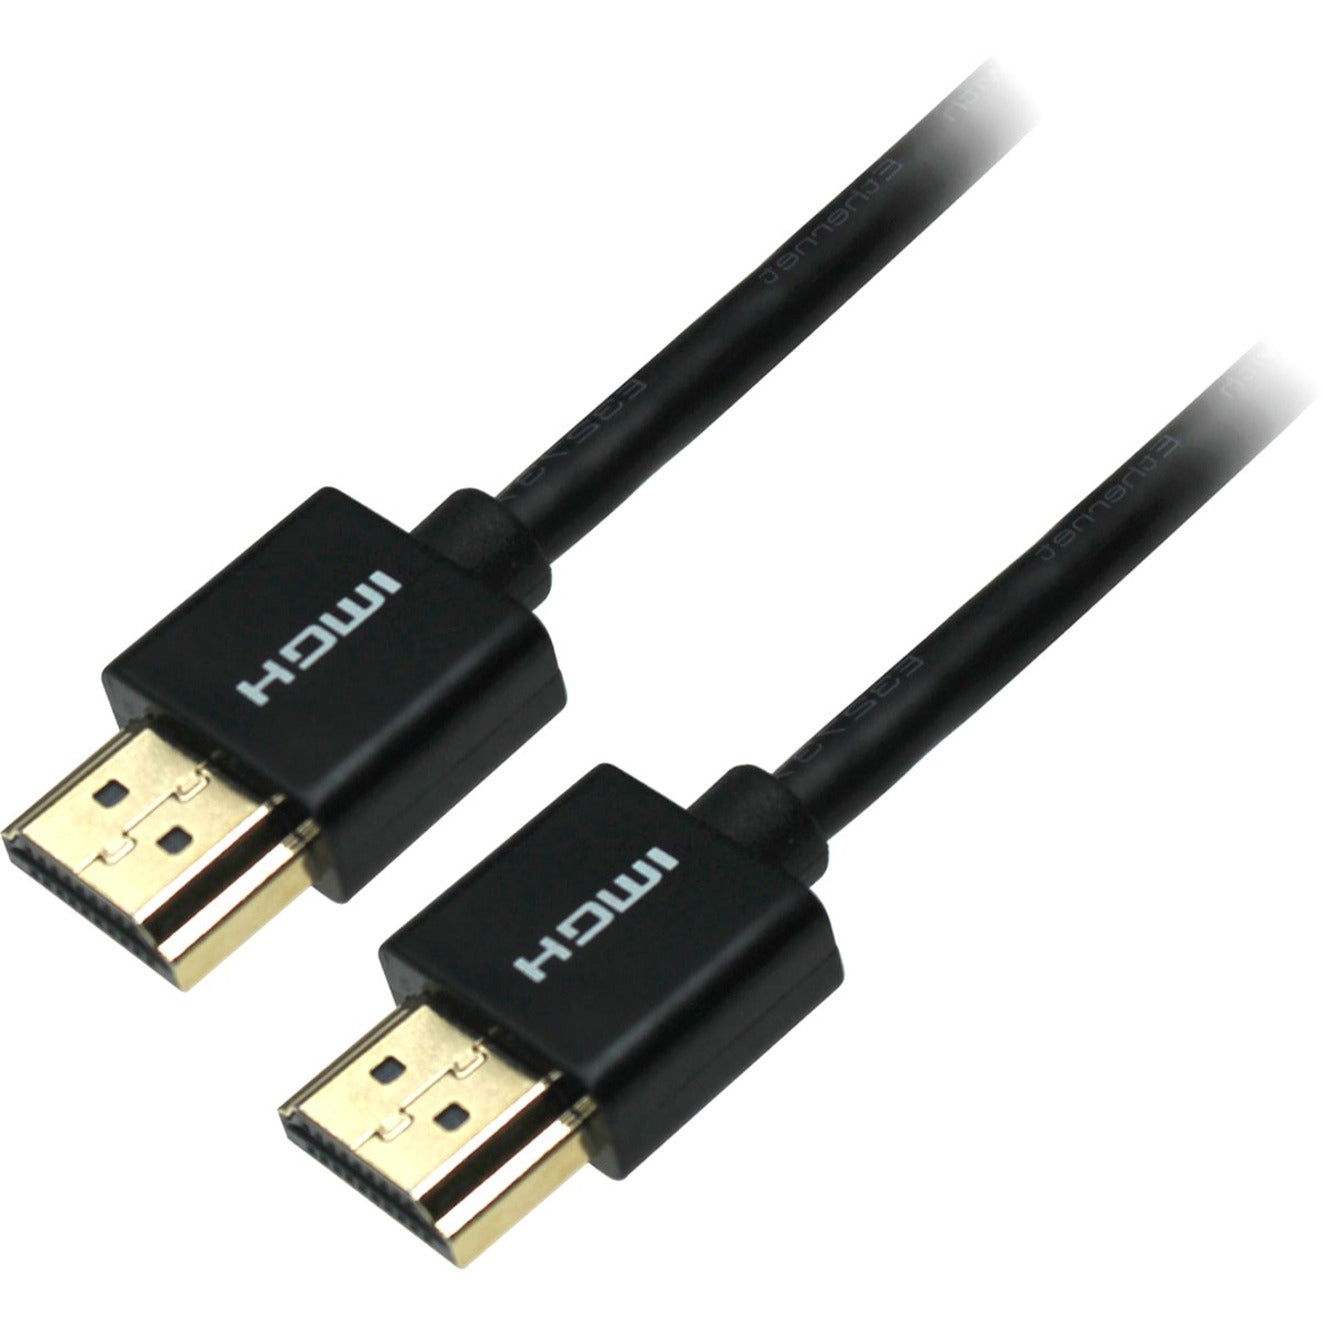 4XEM 4XSLIMHDMI15 15FT Ultra Slim 4K HDMI Cable, Flexible and High-Speed Data Transfer